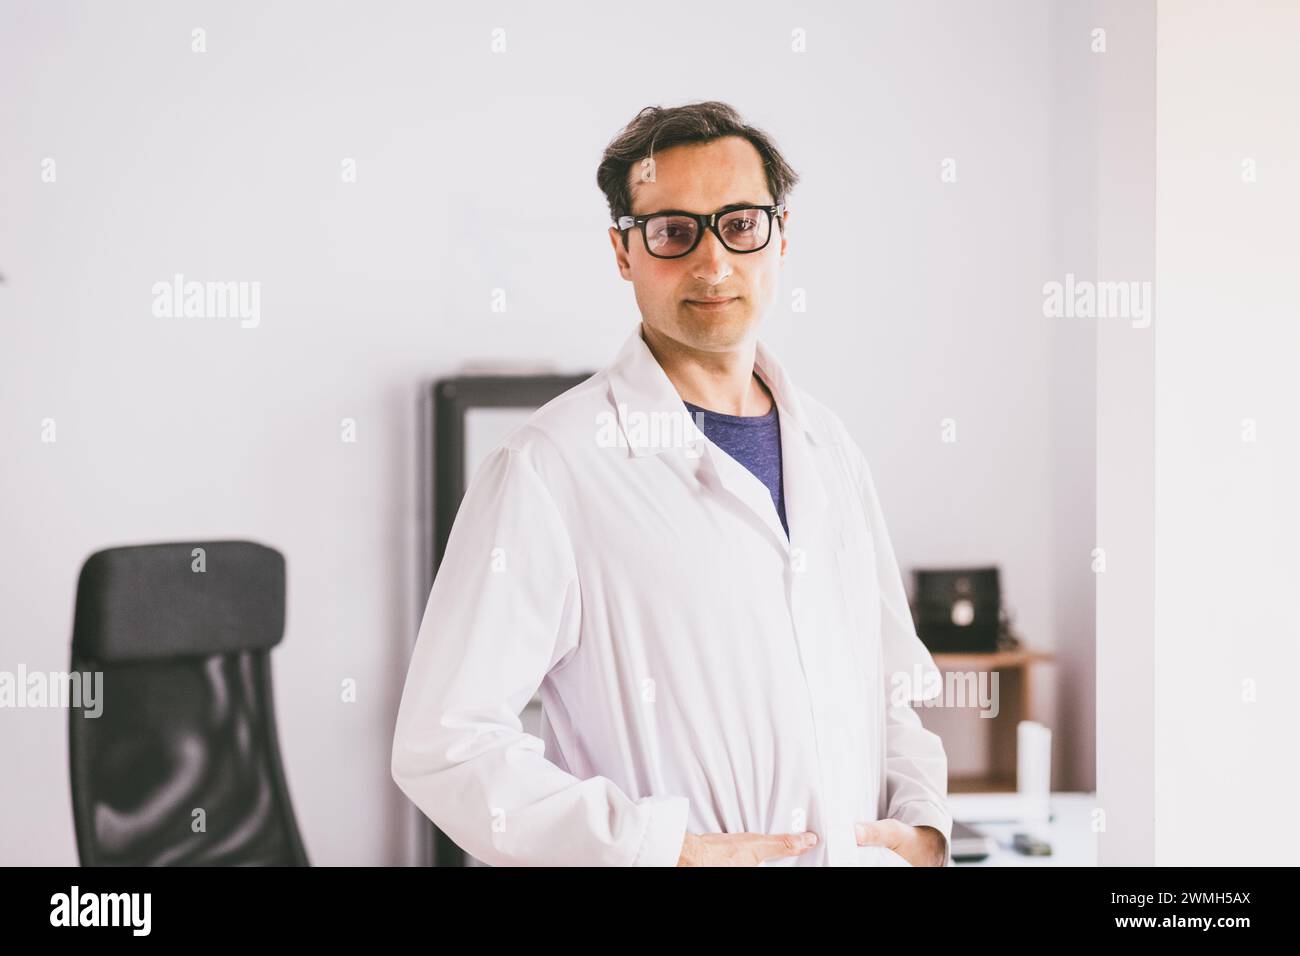 An adult male Caucasian scientist in glasses and a white coat stands and confidently looks forward against the backdrop of the laboratory. Stock Photo